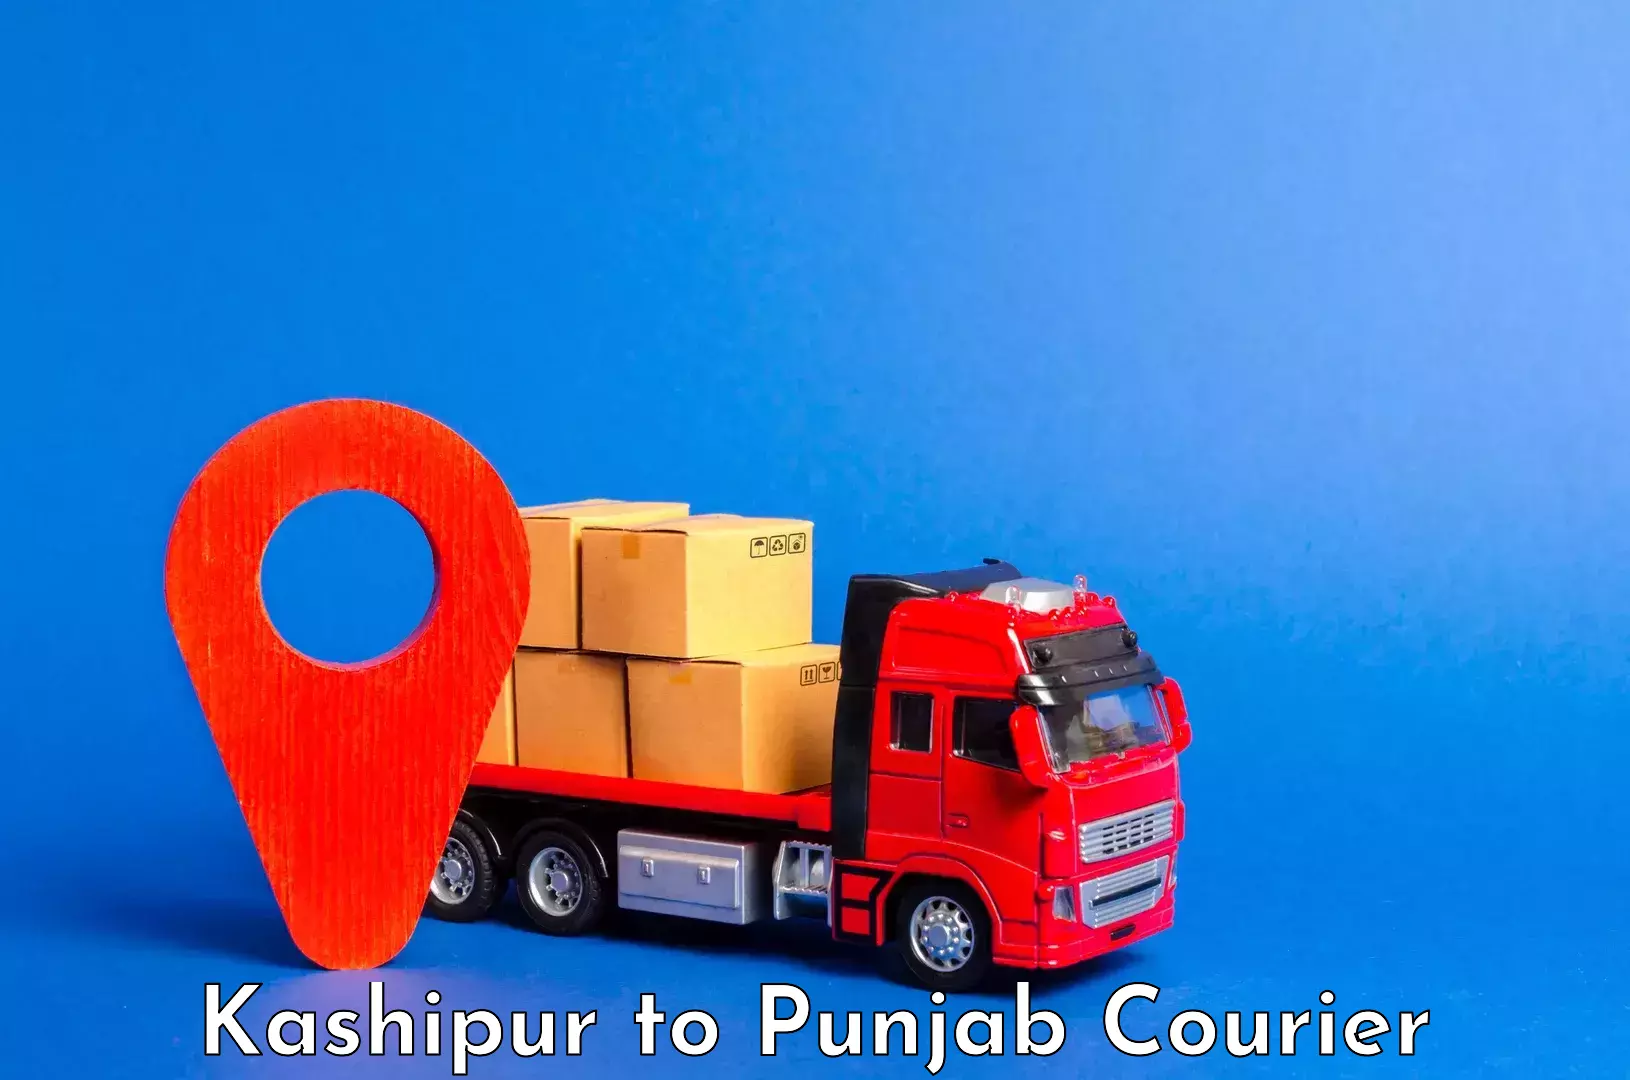 Fast track baggage delivery in Kashipur to Faridkot